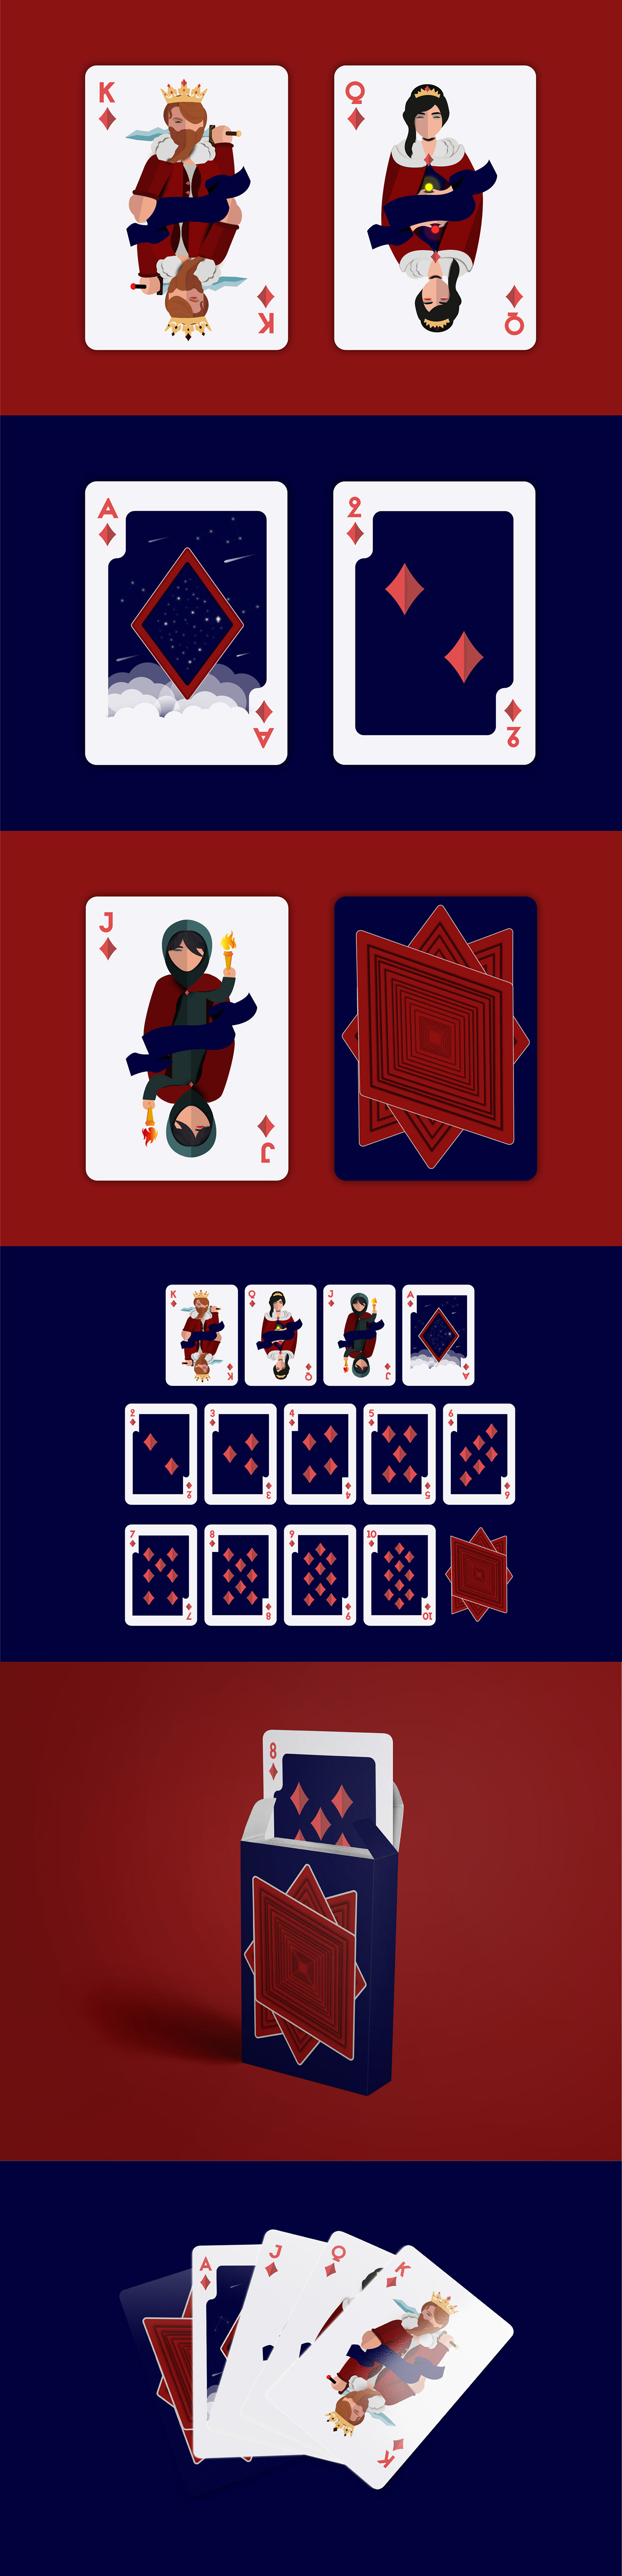 outer space ILLUSTRATION  graphics deck of cards Playing Cards poker cards king queen ace Paper Cut-Out diamonds Patterns